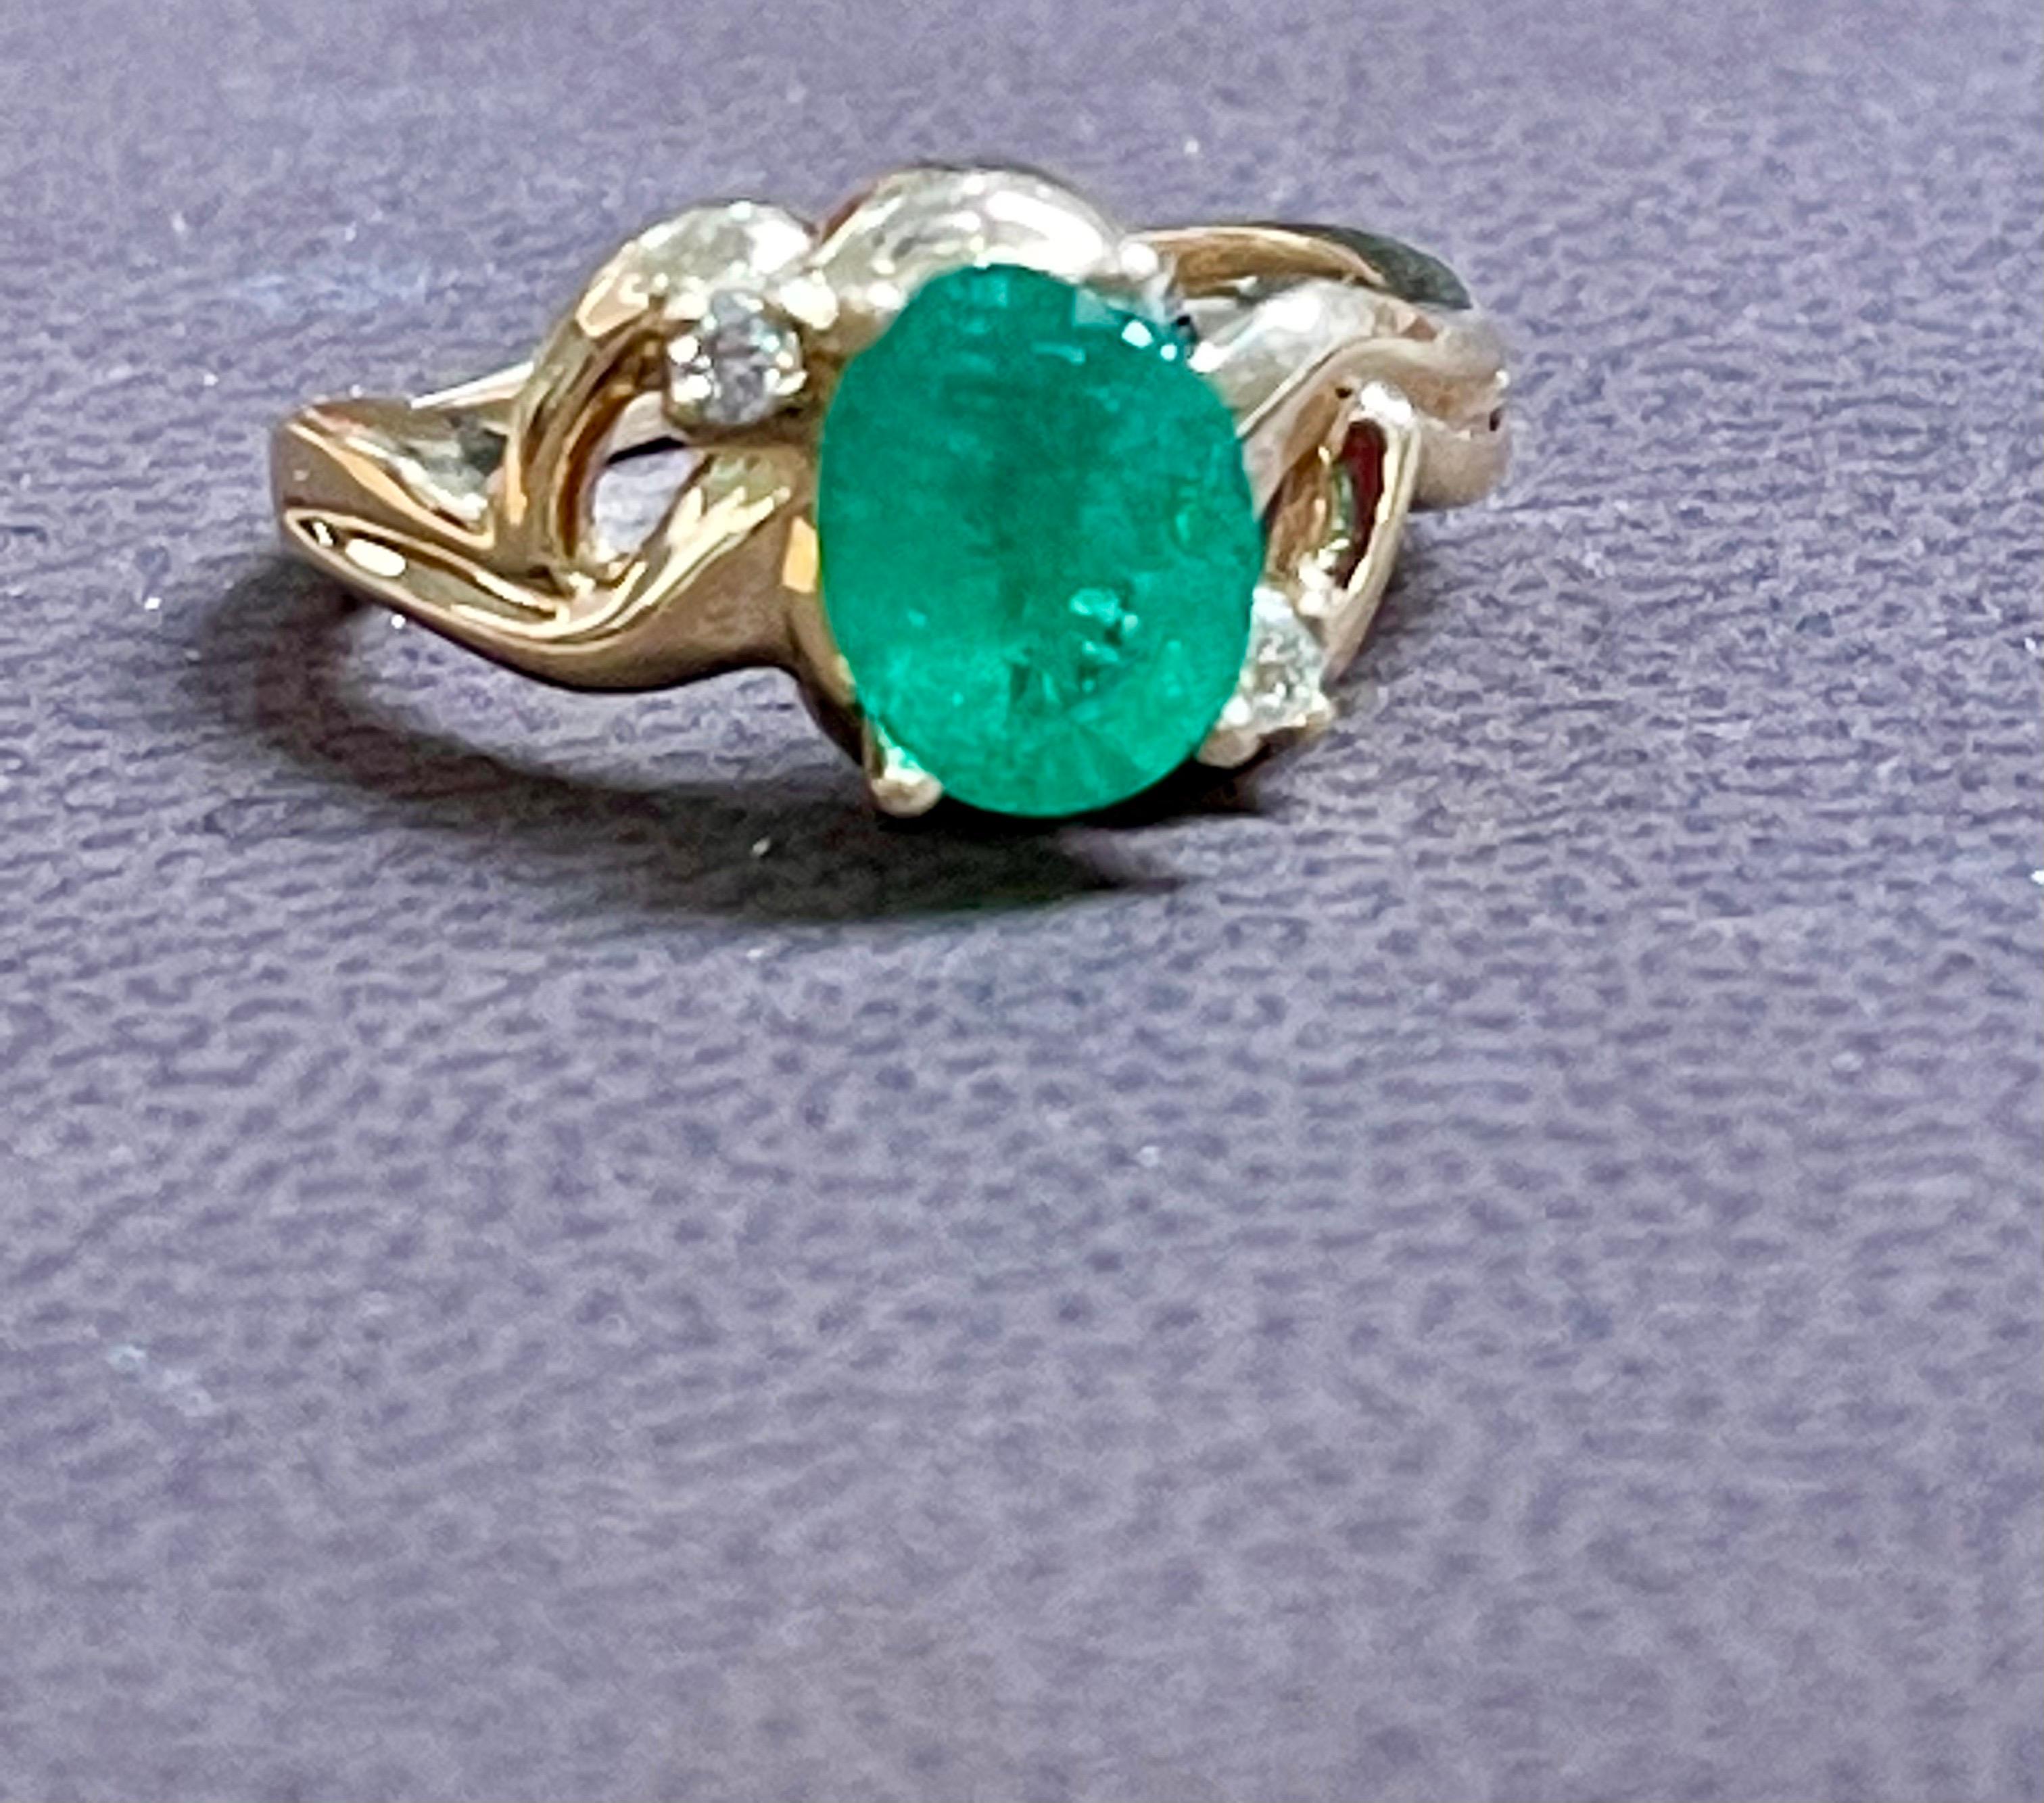 1.8 Carat Natural Oval Emerald and Diamond Ring 14 Karat Yellow Gold In Excellent Condition For Sale In New York, NY